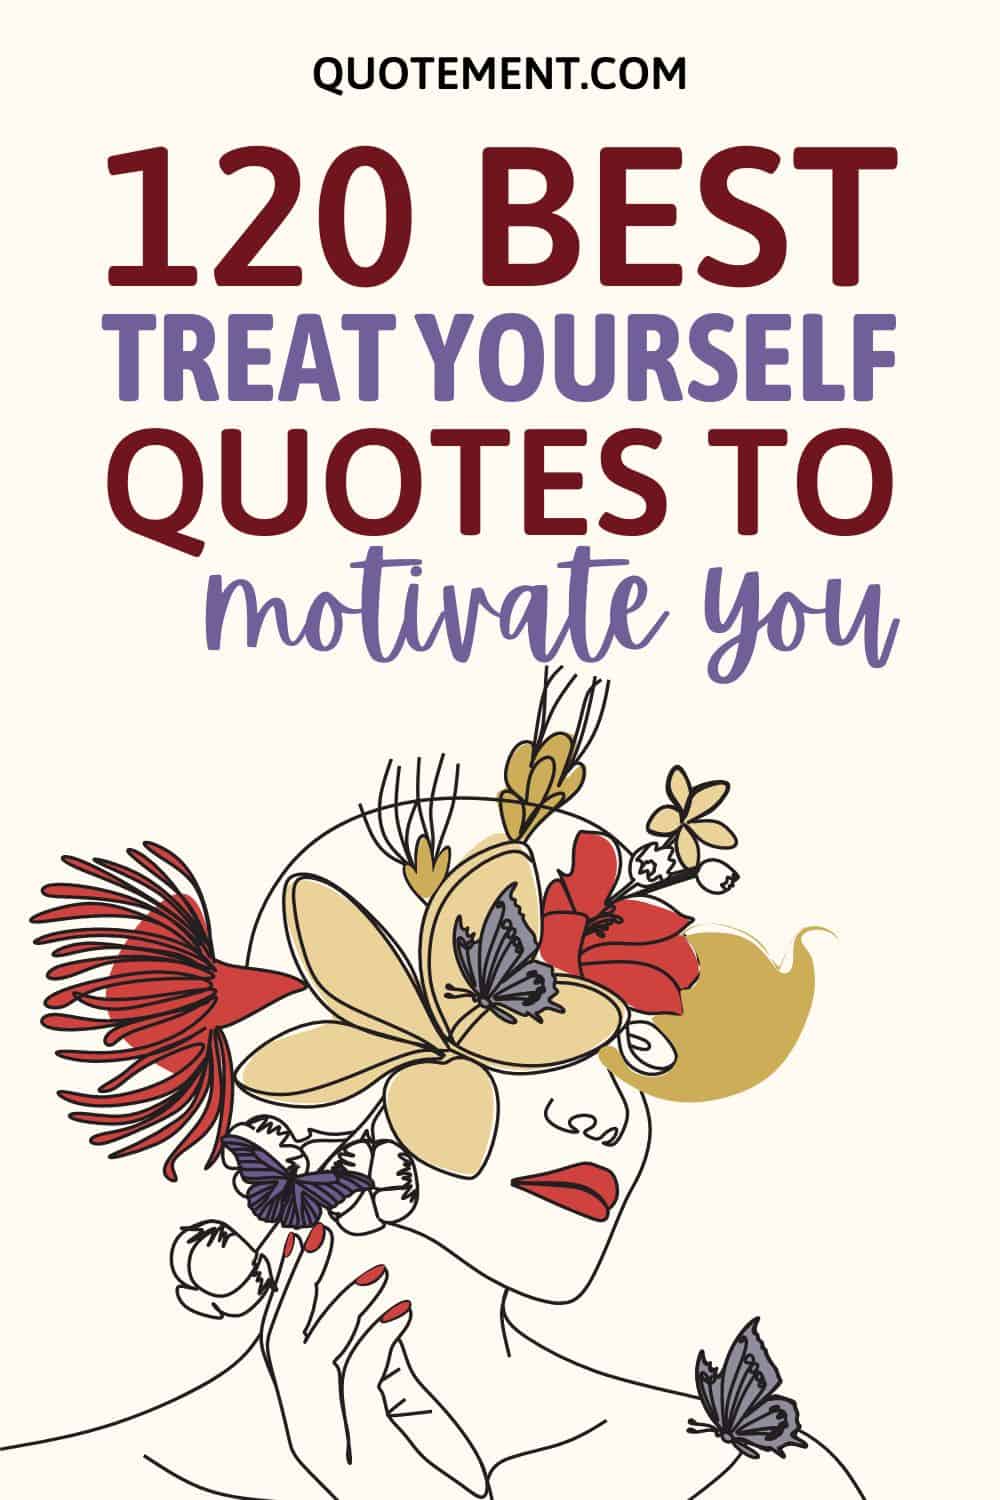 List Of 120 Treat Yourself Quotes To Live Your Dream Life